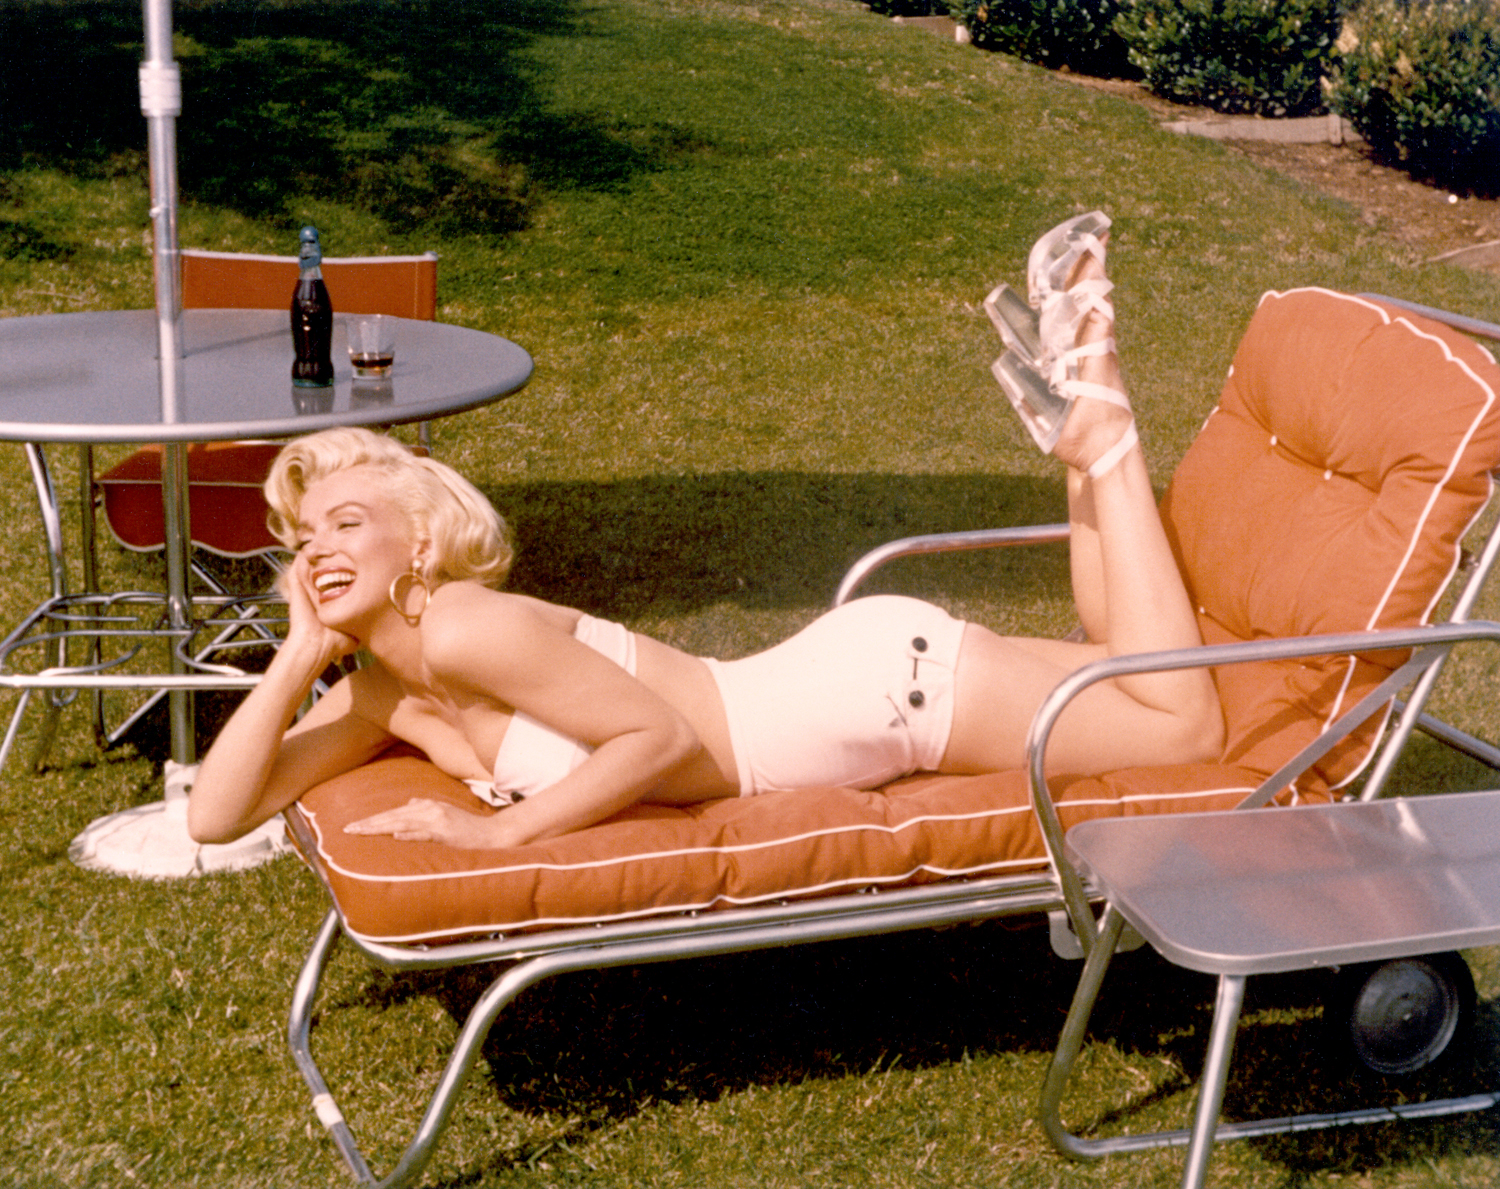 Circa 1953, Monroe poses in a bathing suit and heels.